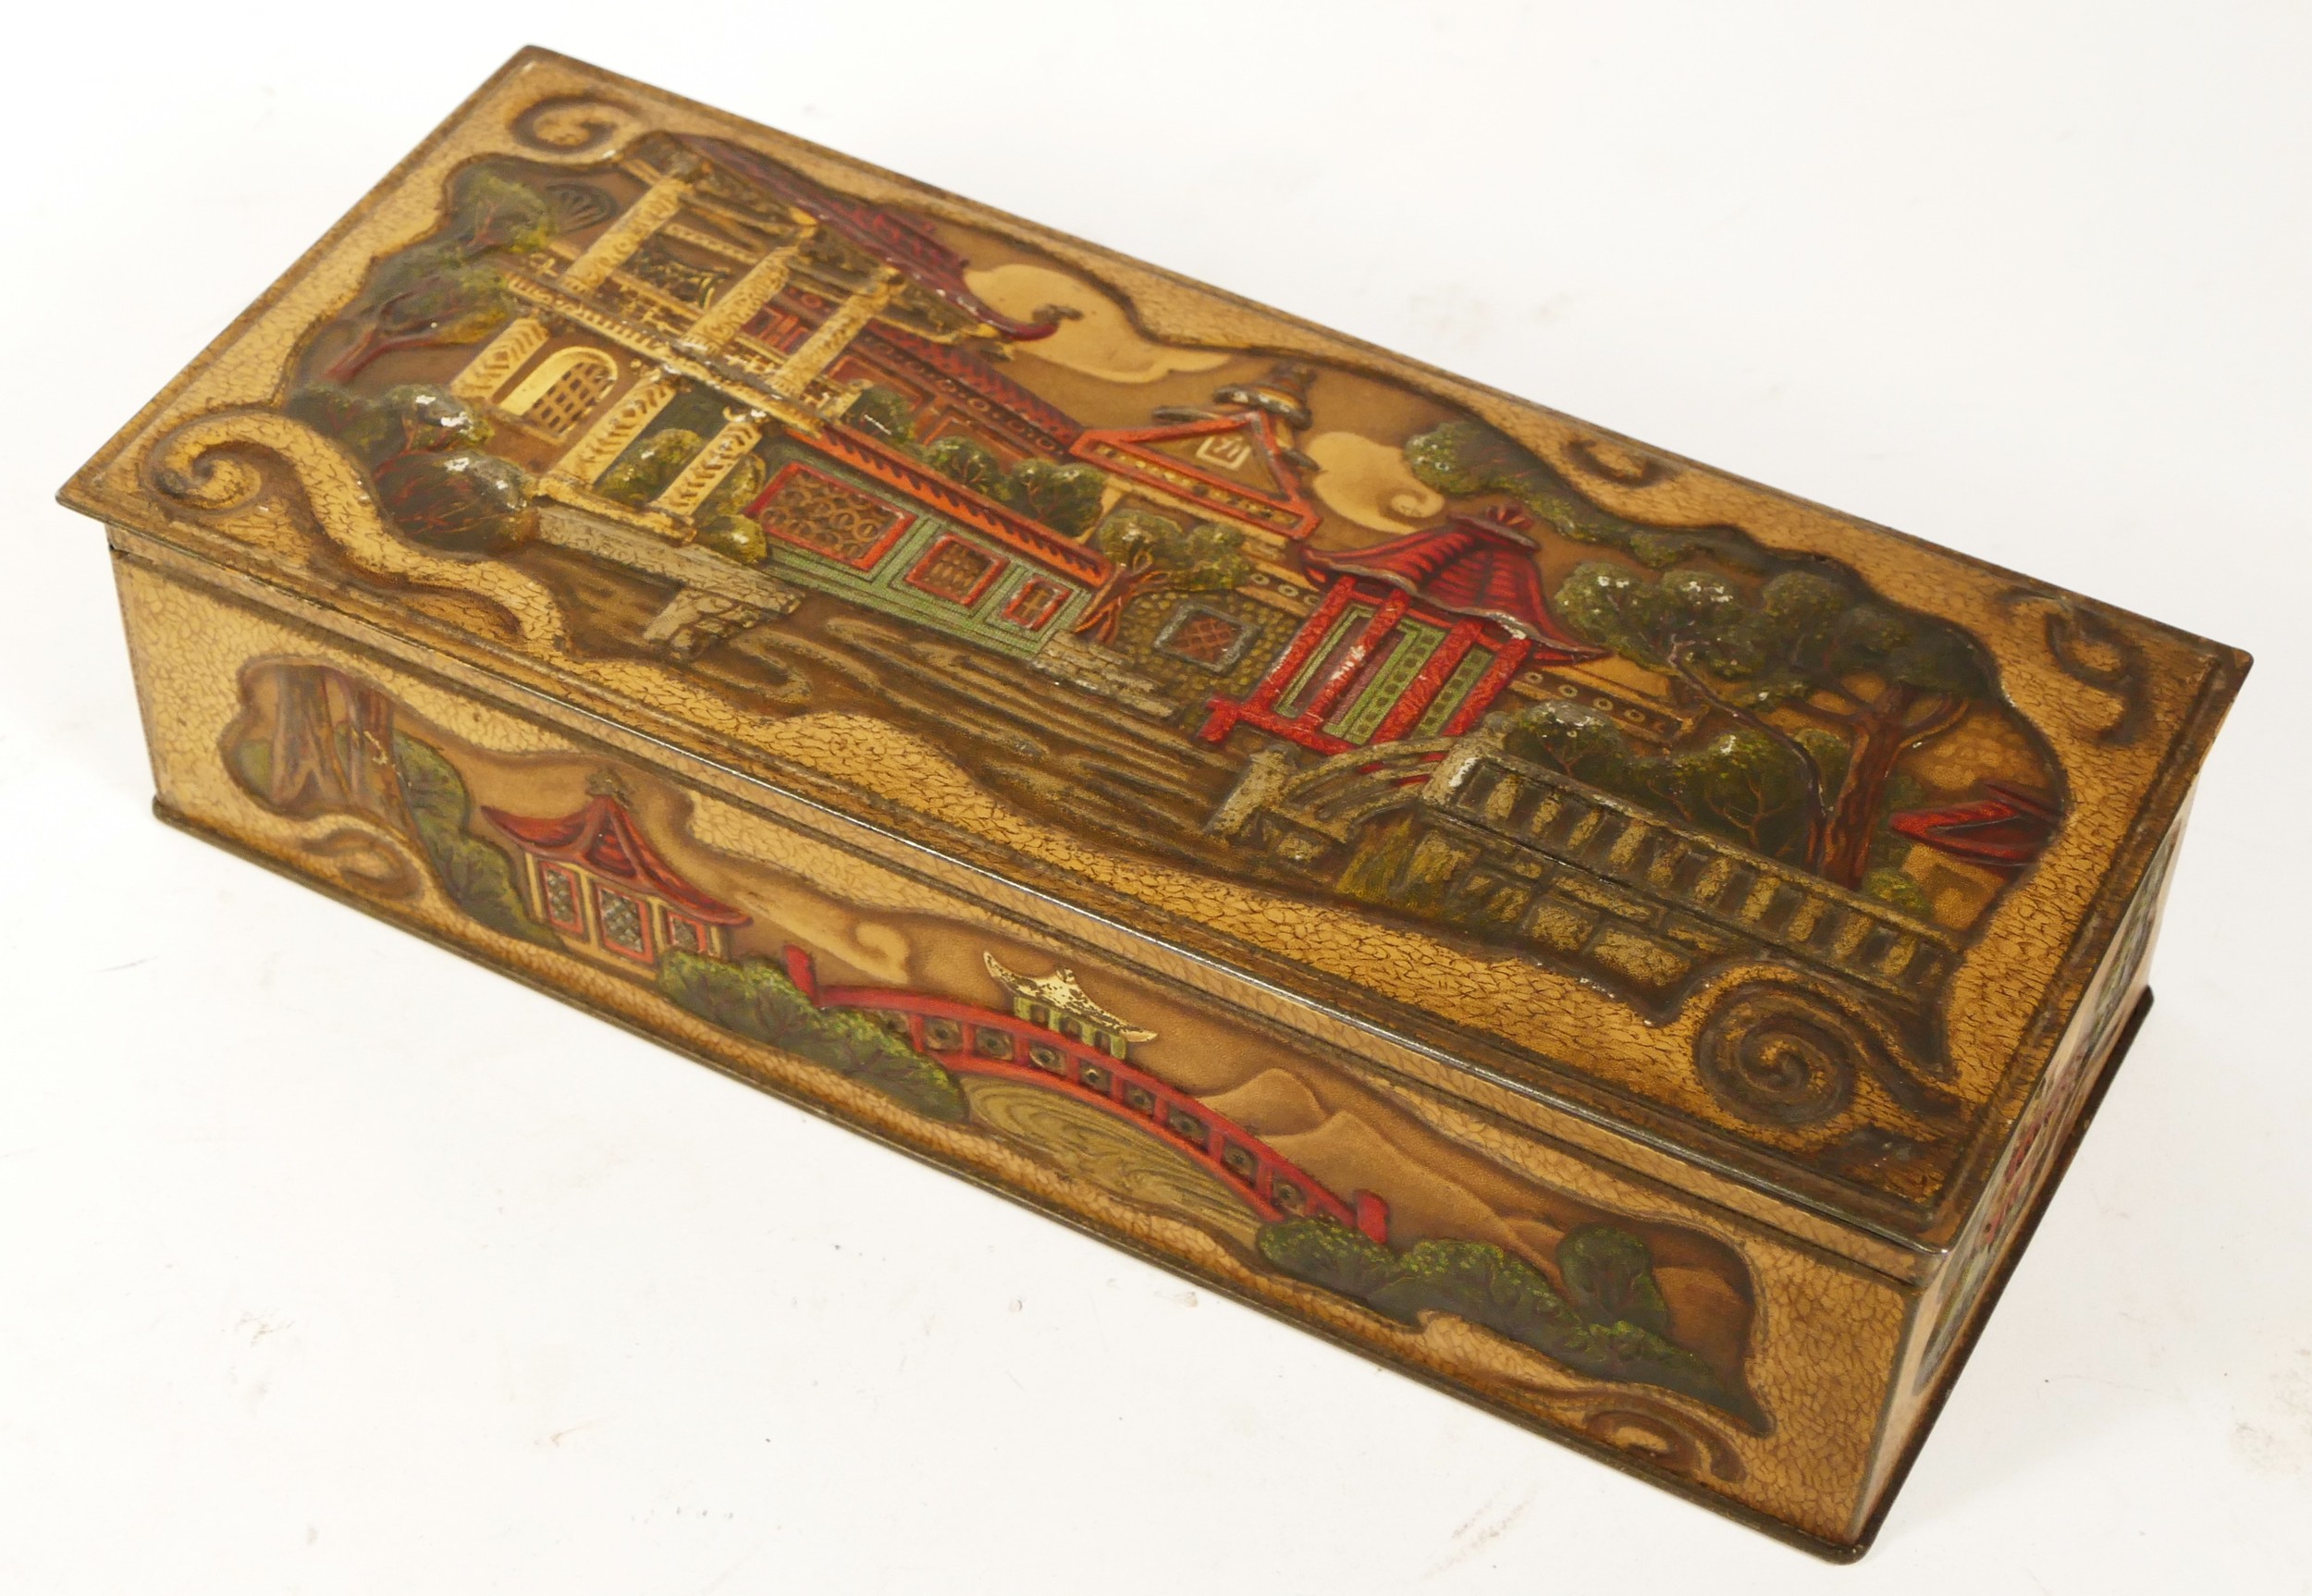 A late 19th century Macfarlane, Lang & Co biscuit tin, made by Barringer, Wallis & Manners, finely - Image 3 of 3